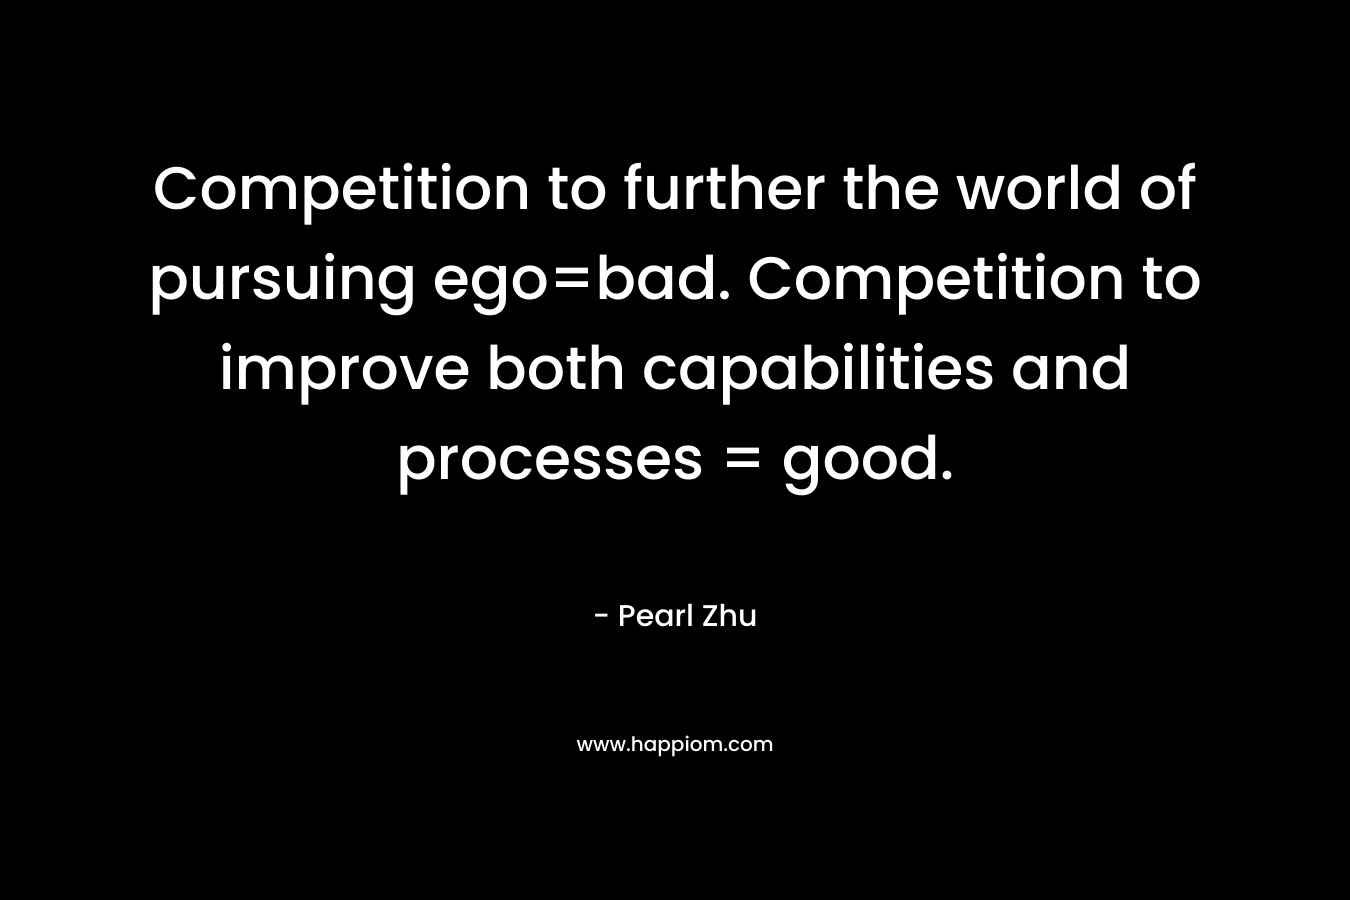 Competition to further the world of pursuing ego=bad. Competition to improve both capabilities and processes = good.